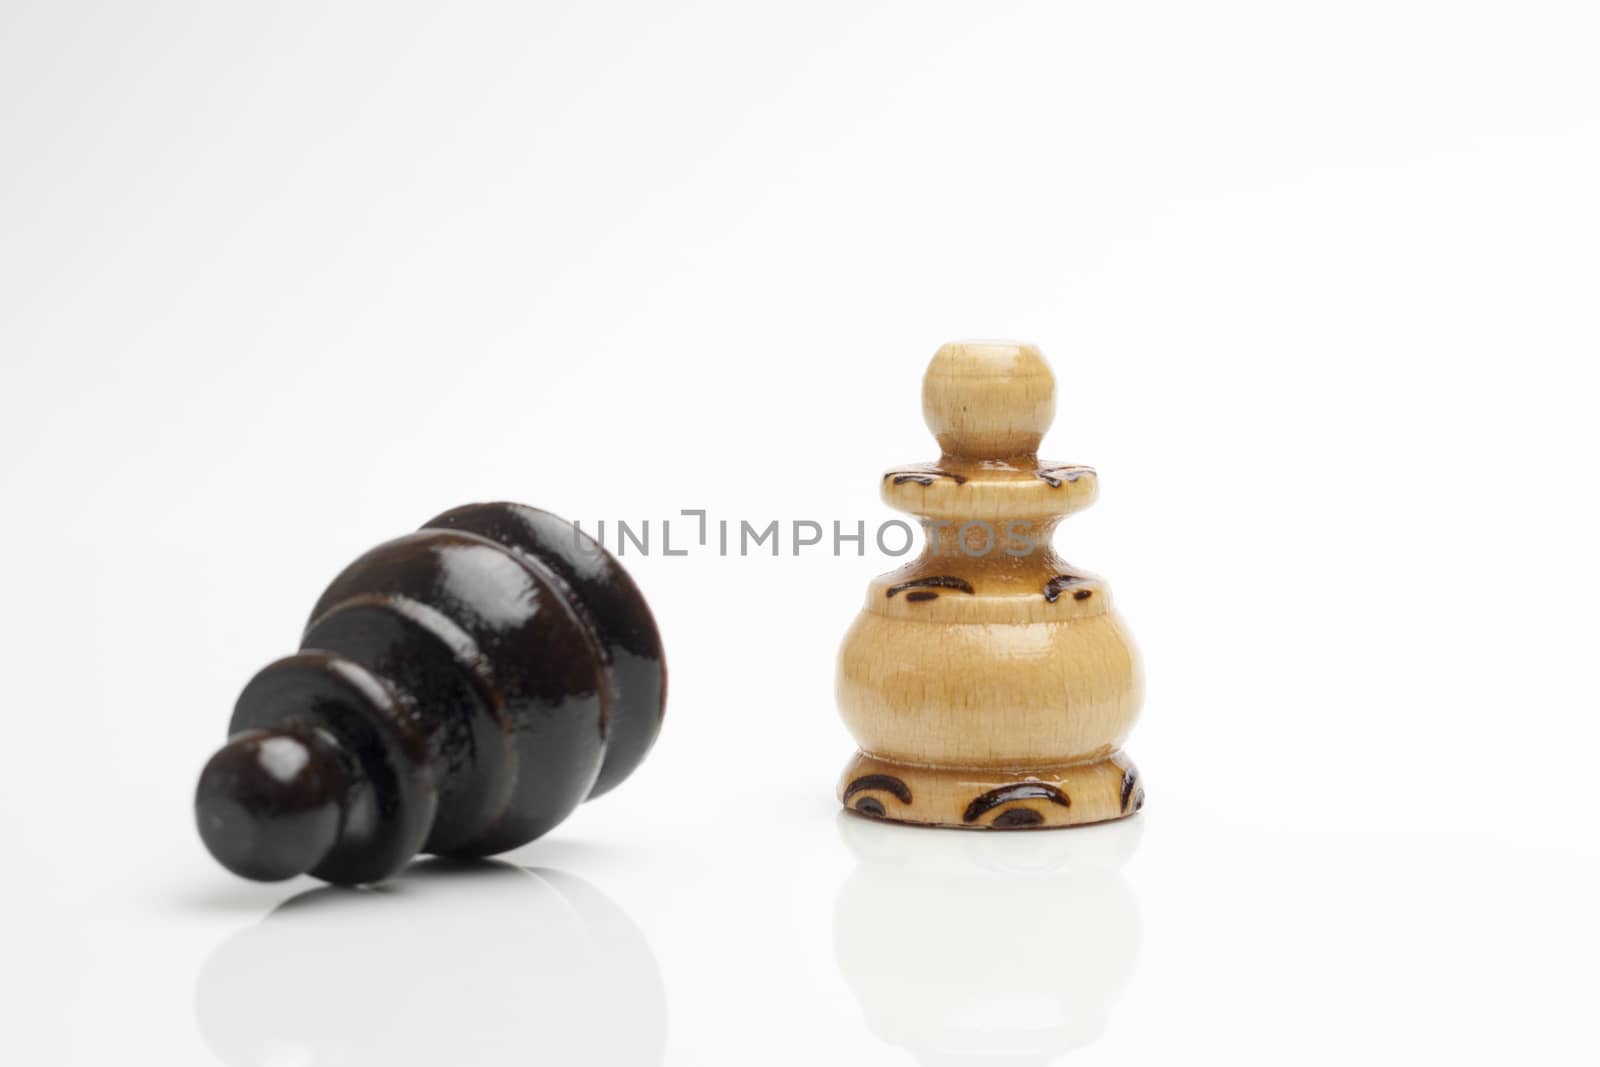 White and black chess figures on white background